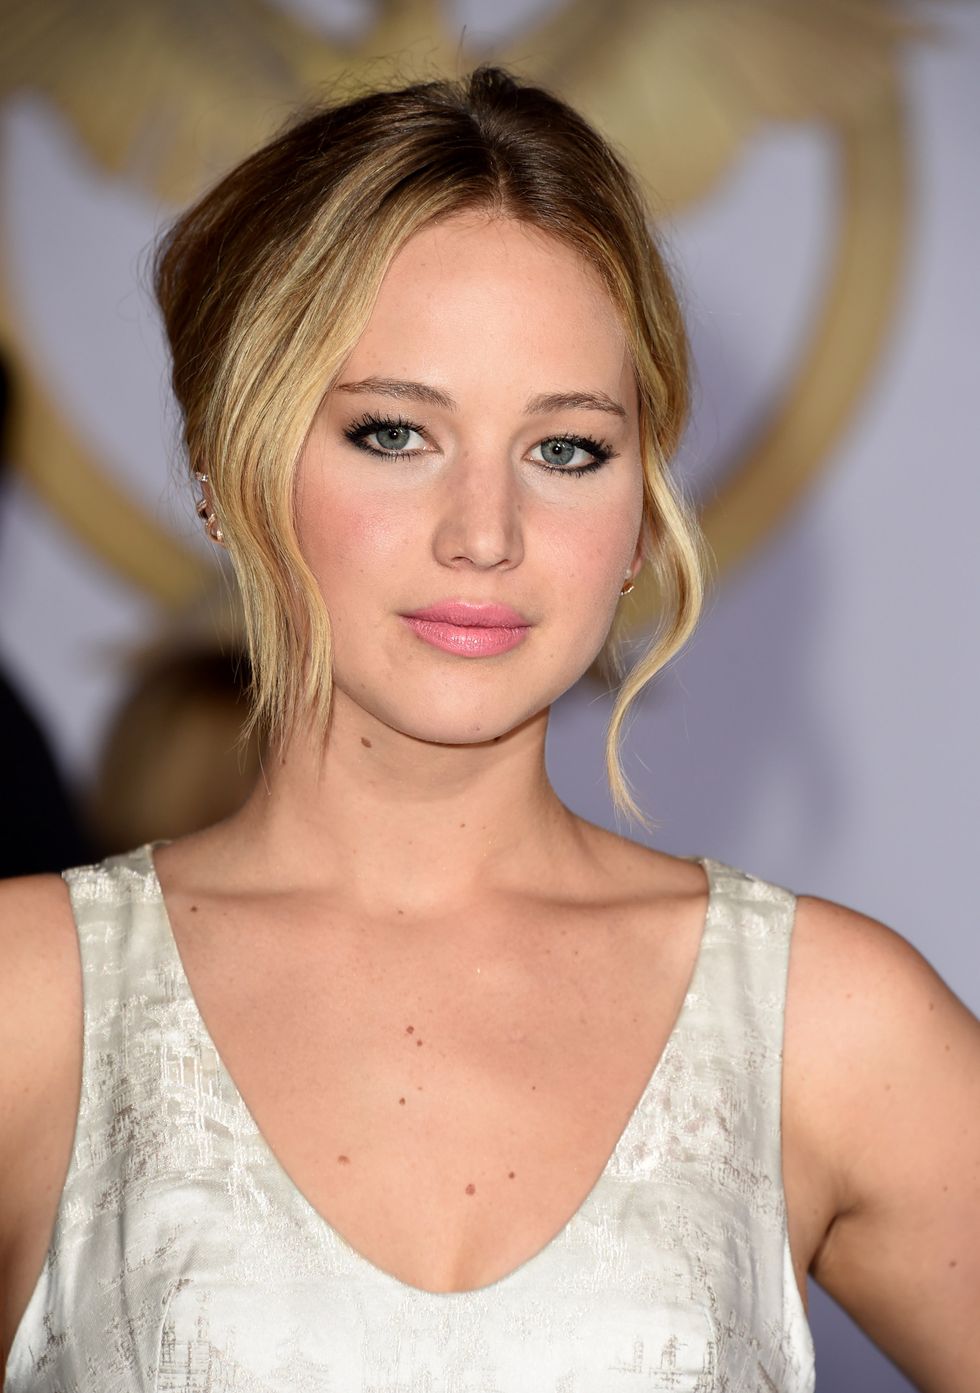 Jennifer Lawrence wears a sleeveless white Dior gown to the LA premiere of Mockingjay